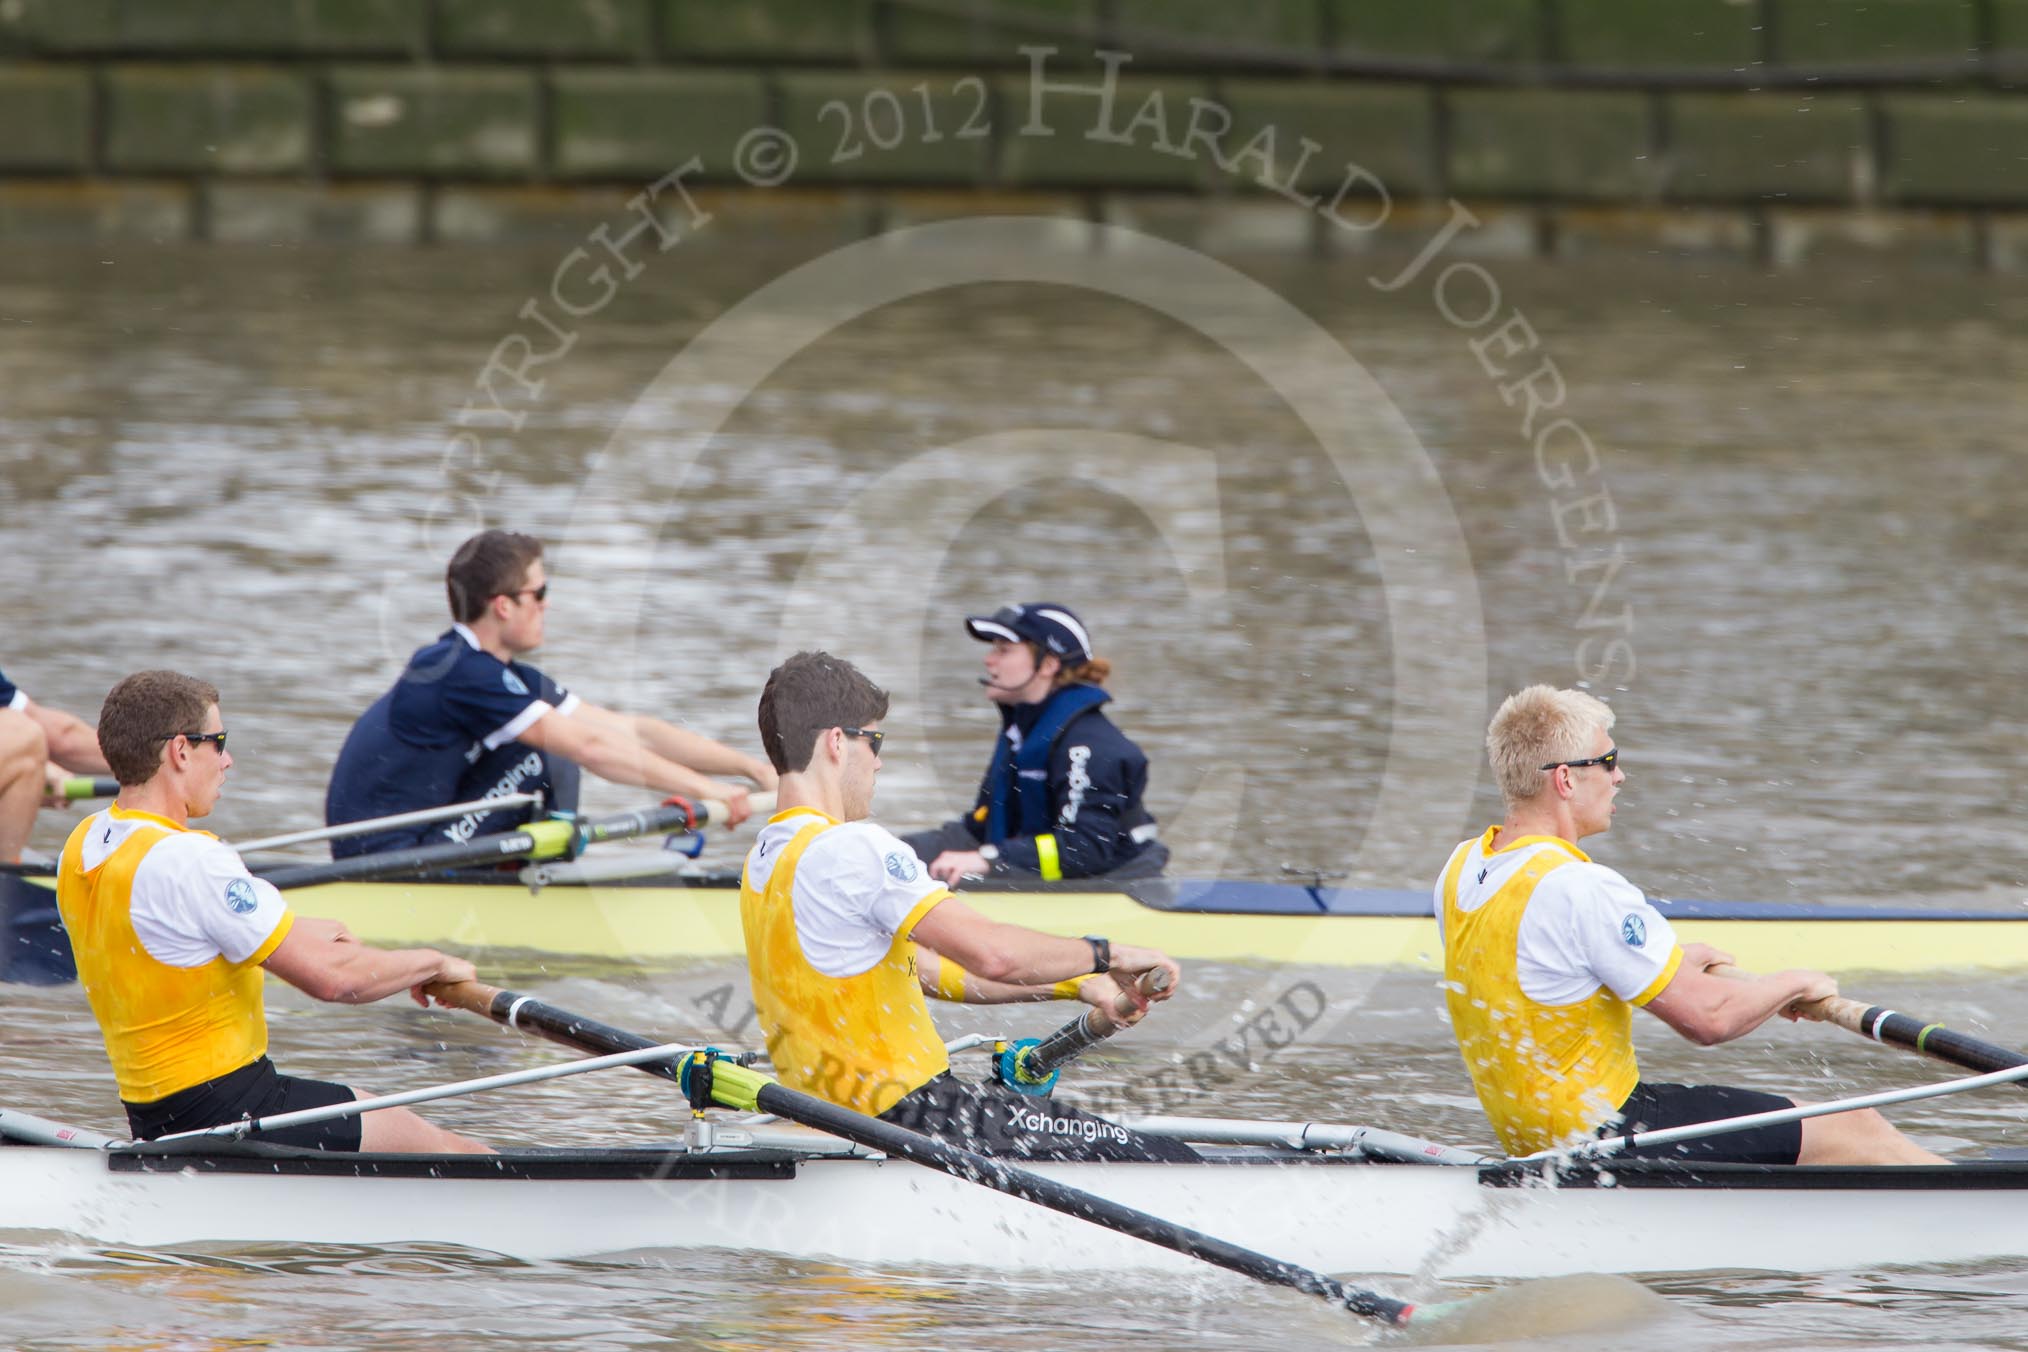 The Boat Race 2012: The Goldie/Isis Boat Race: Justin Webb, stroke Tom Watson, and cox Katherine Apfelbaum in the Oxford reserve boat, Tom Havorth, Hank Moore, and Joel Jennings in Goldie..




on 07 April 2012 at 13:46, image #167